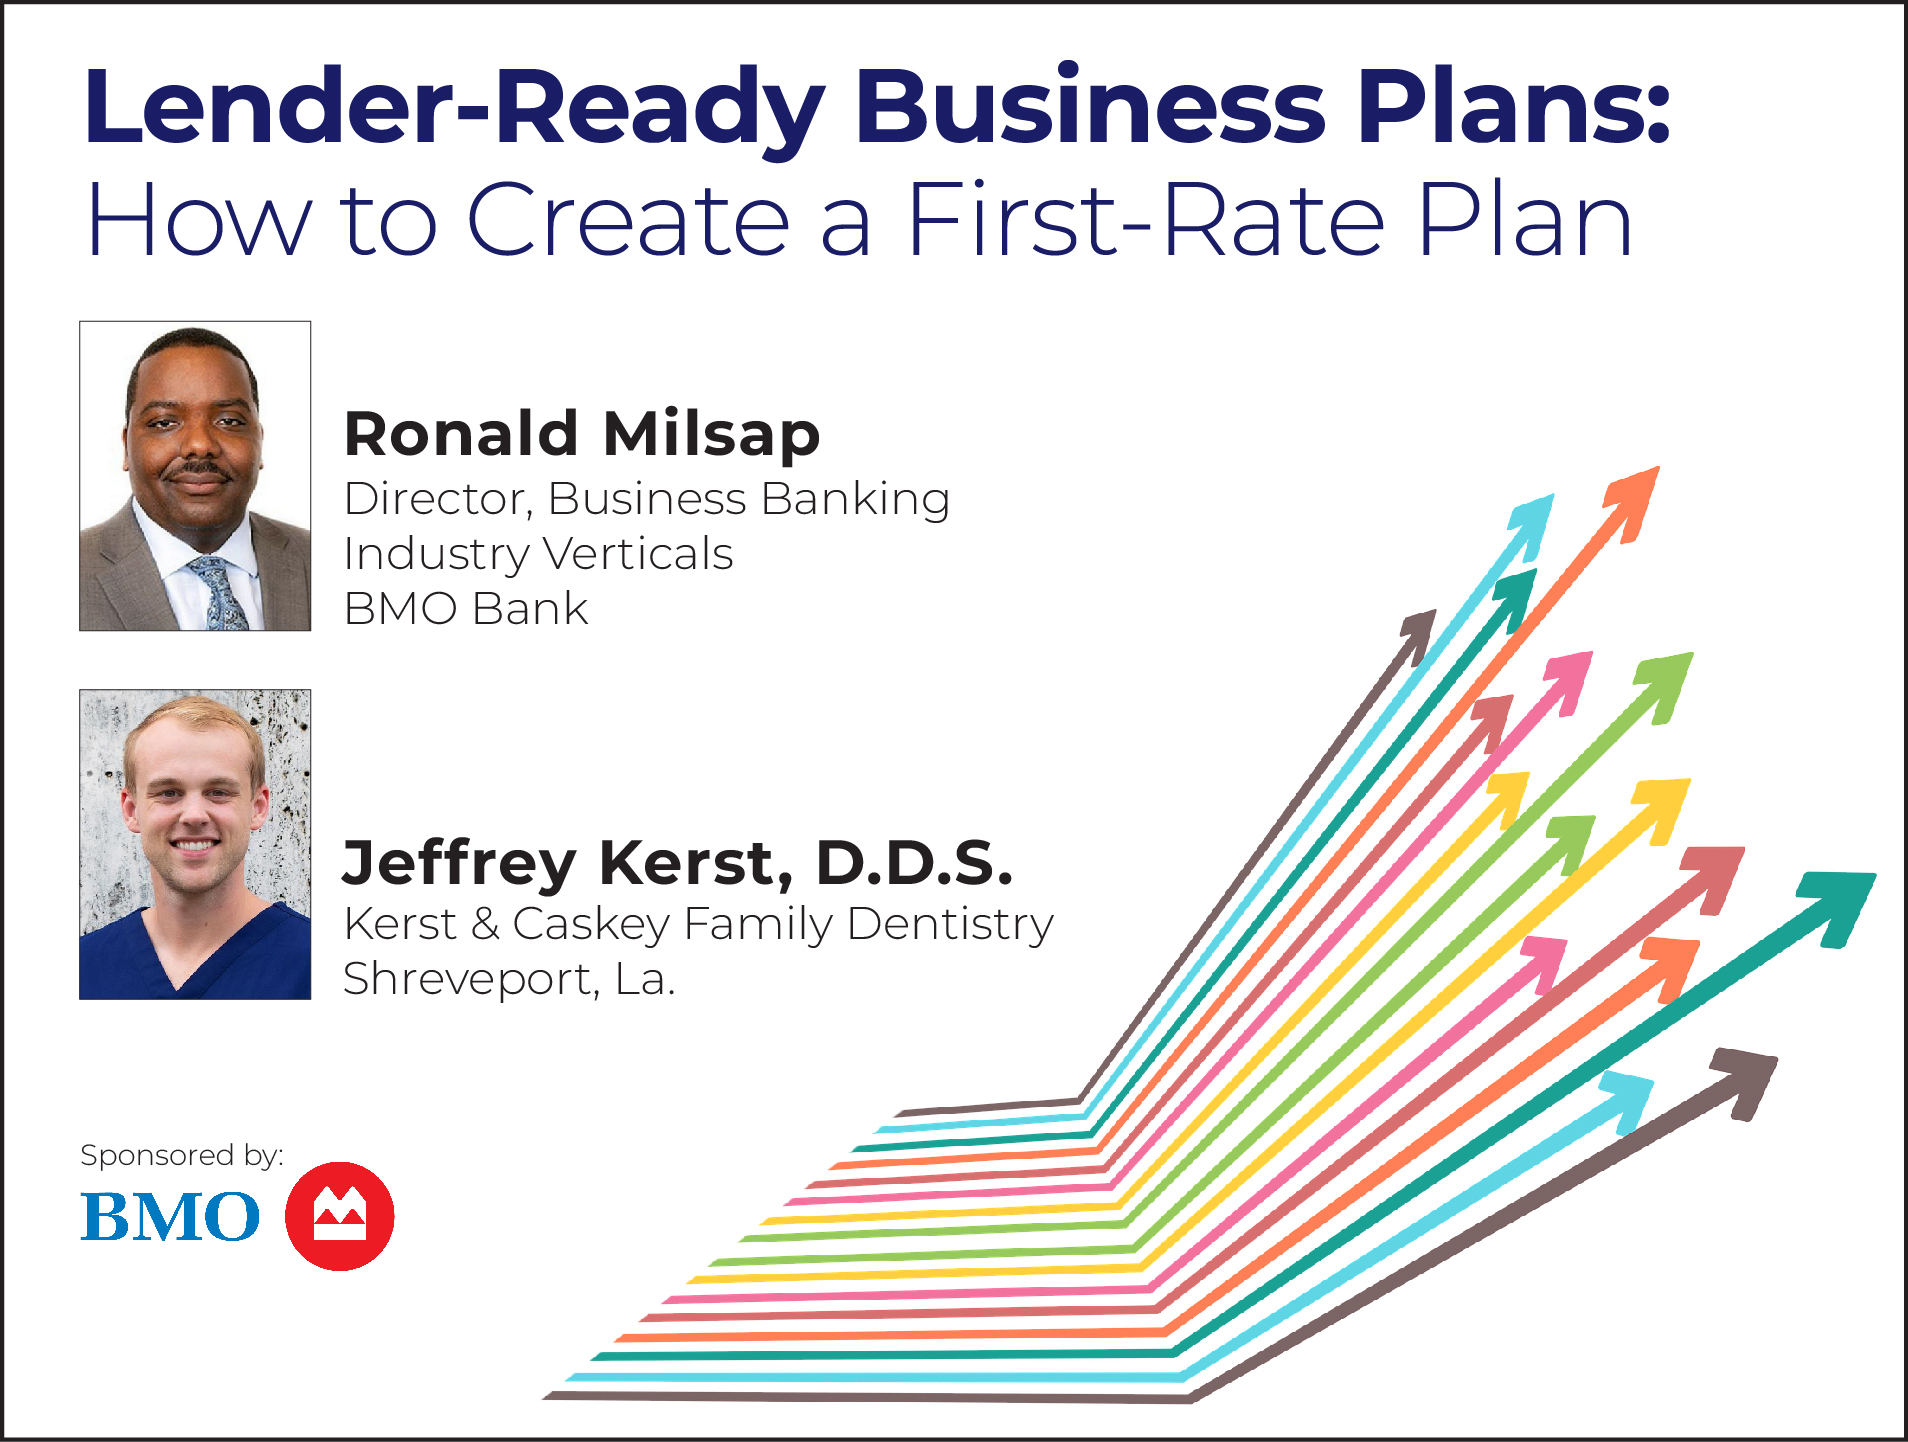 Lender-Ready Business Plans: How to Create a First-Rate Plan (Recorded Webinar)